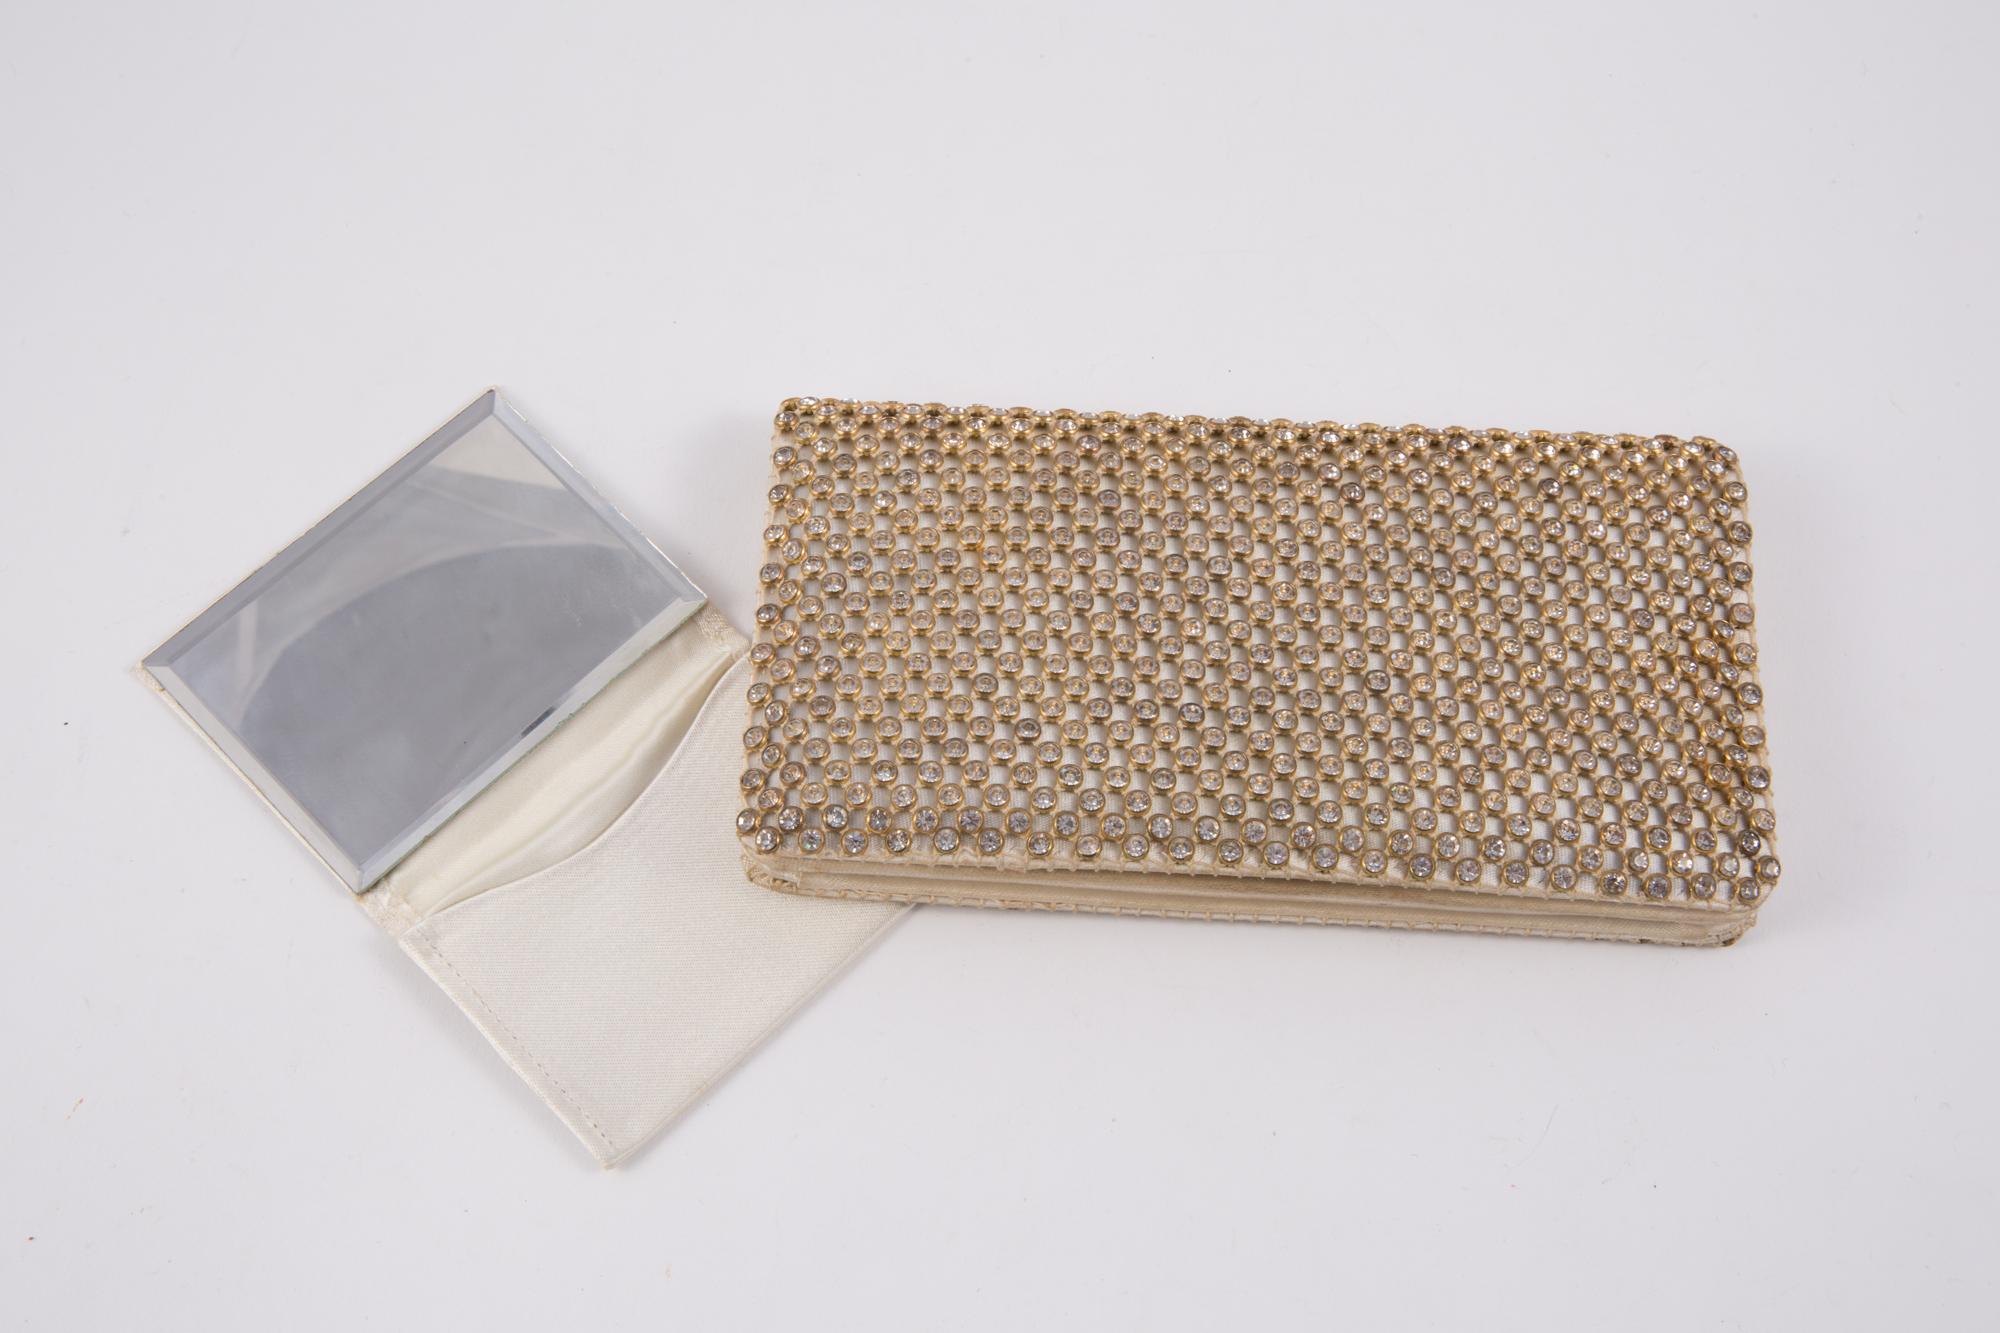 1960 evening ivory silk clutch bag featuring a full strass pattern with gold tone outlines, inside compartments, a snap closure and a separated mirror.
Length 6.7in. (17cm)
Height 3.5in. (9cm)
Depth 1.18in. (3cm) 
In good vintage condition. Made in